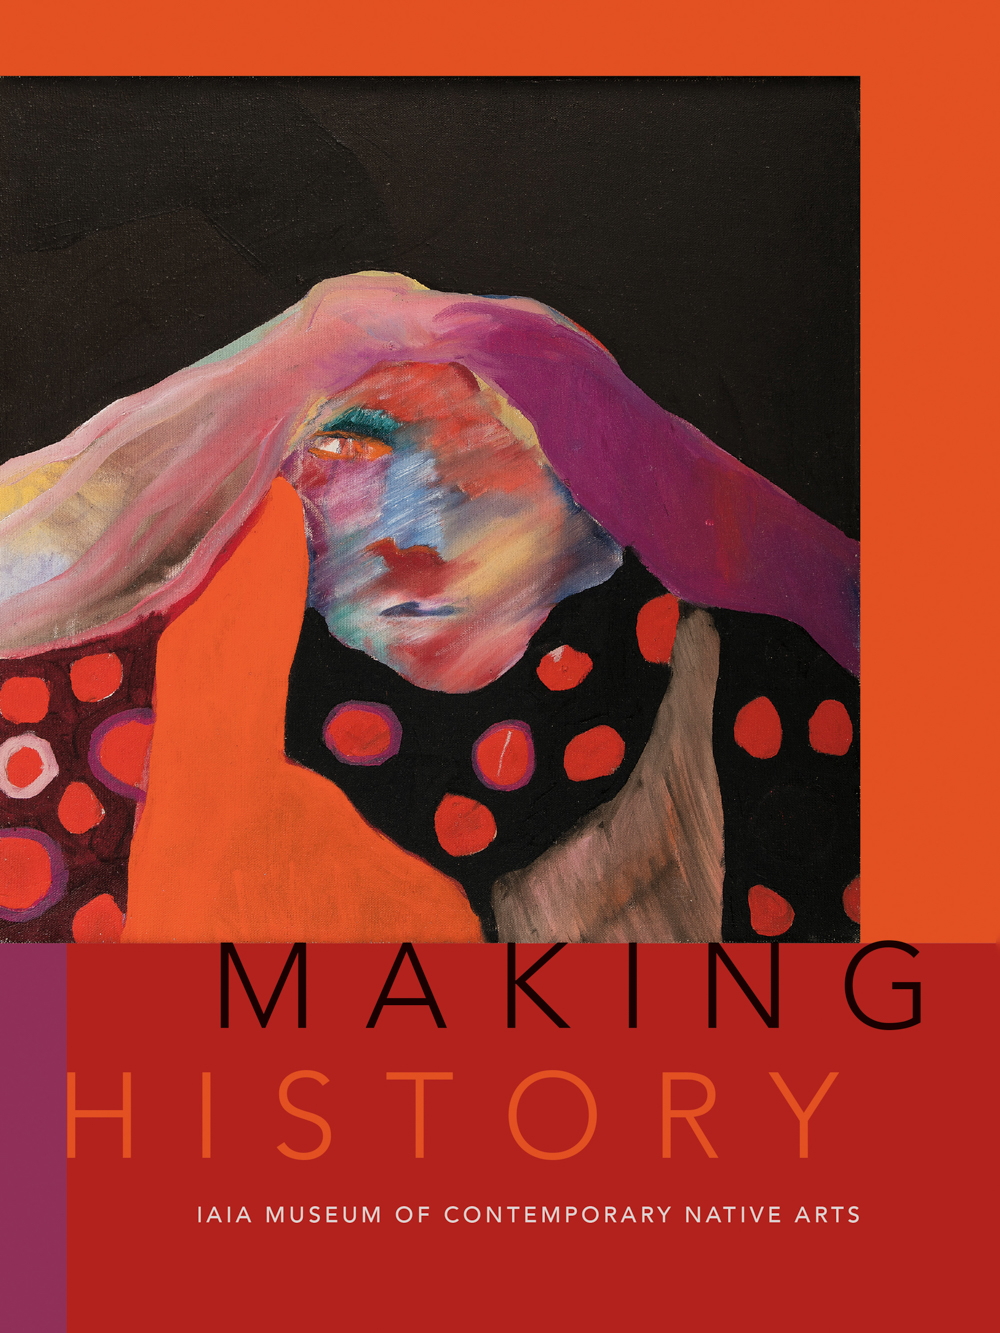 Link to Making History: IAIA Museum of Contemporary Native Arts by Institute of American Indian Arts in the catalog